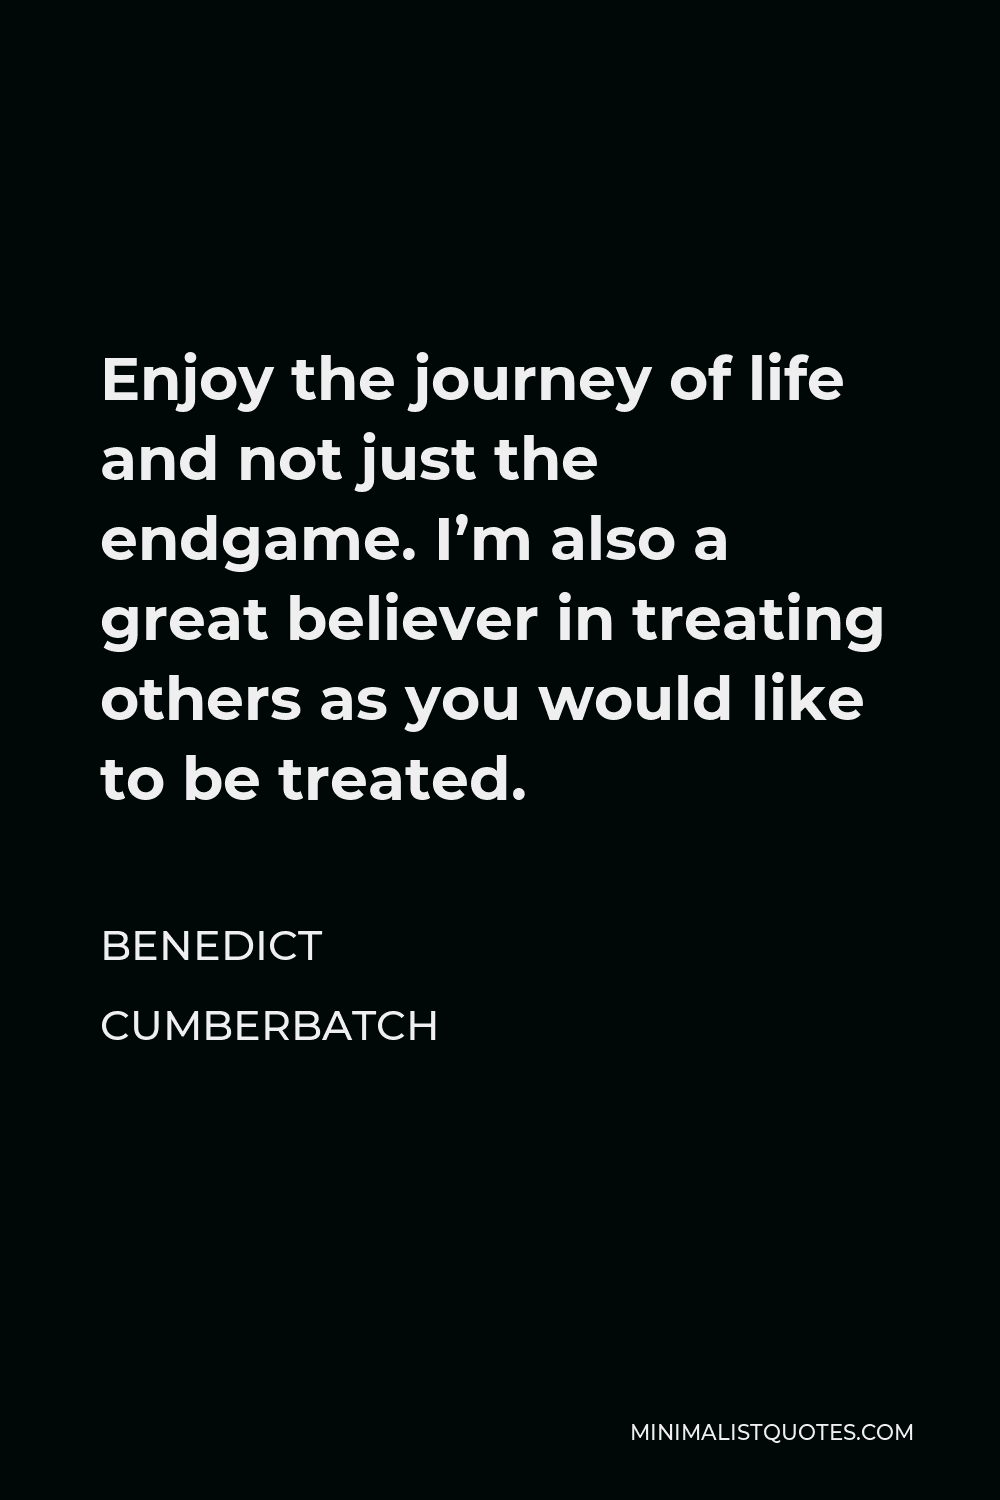 Benedict Cumberbatch Quote - Enjoy the journey of life and not just the endgame.